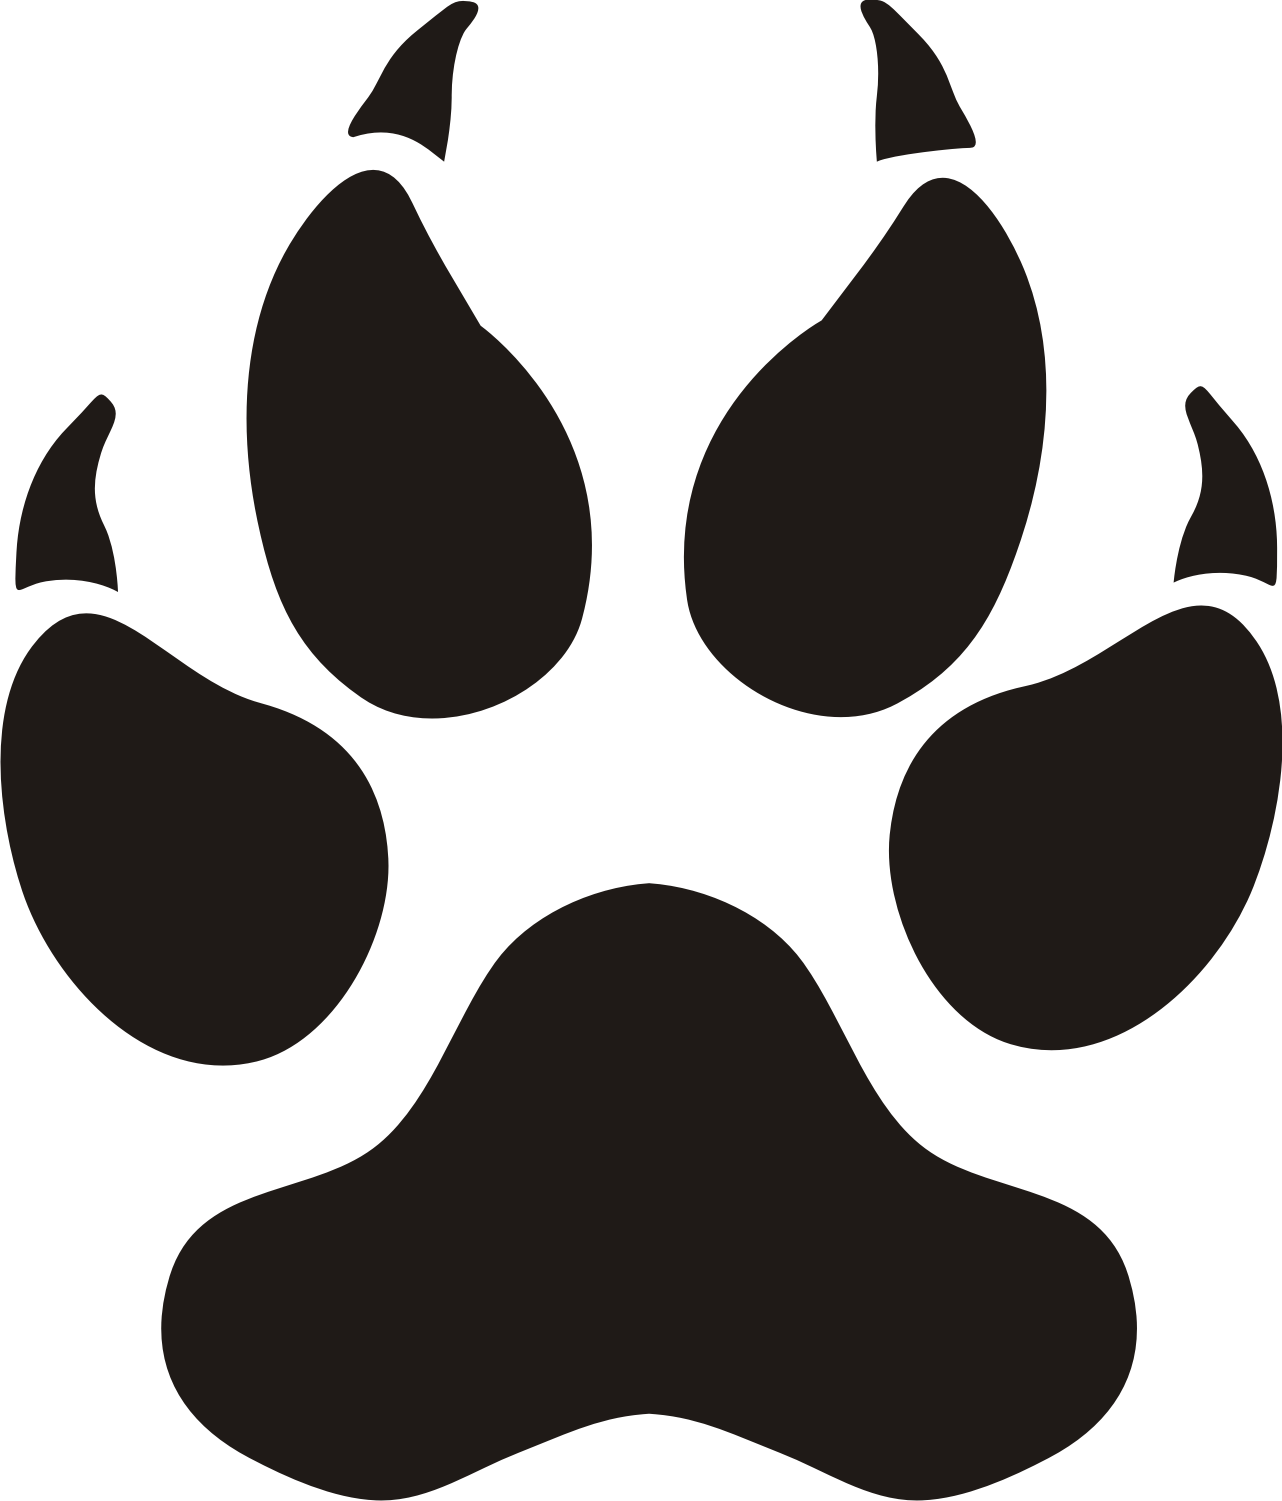 Dog Paw Print Clip Art Free Download Cliparts.co